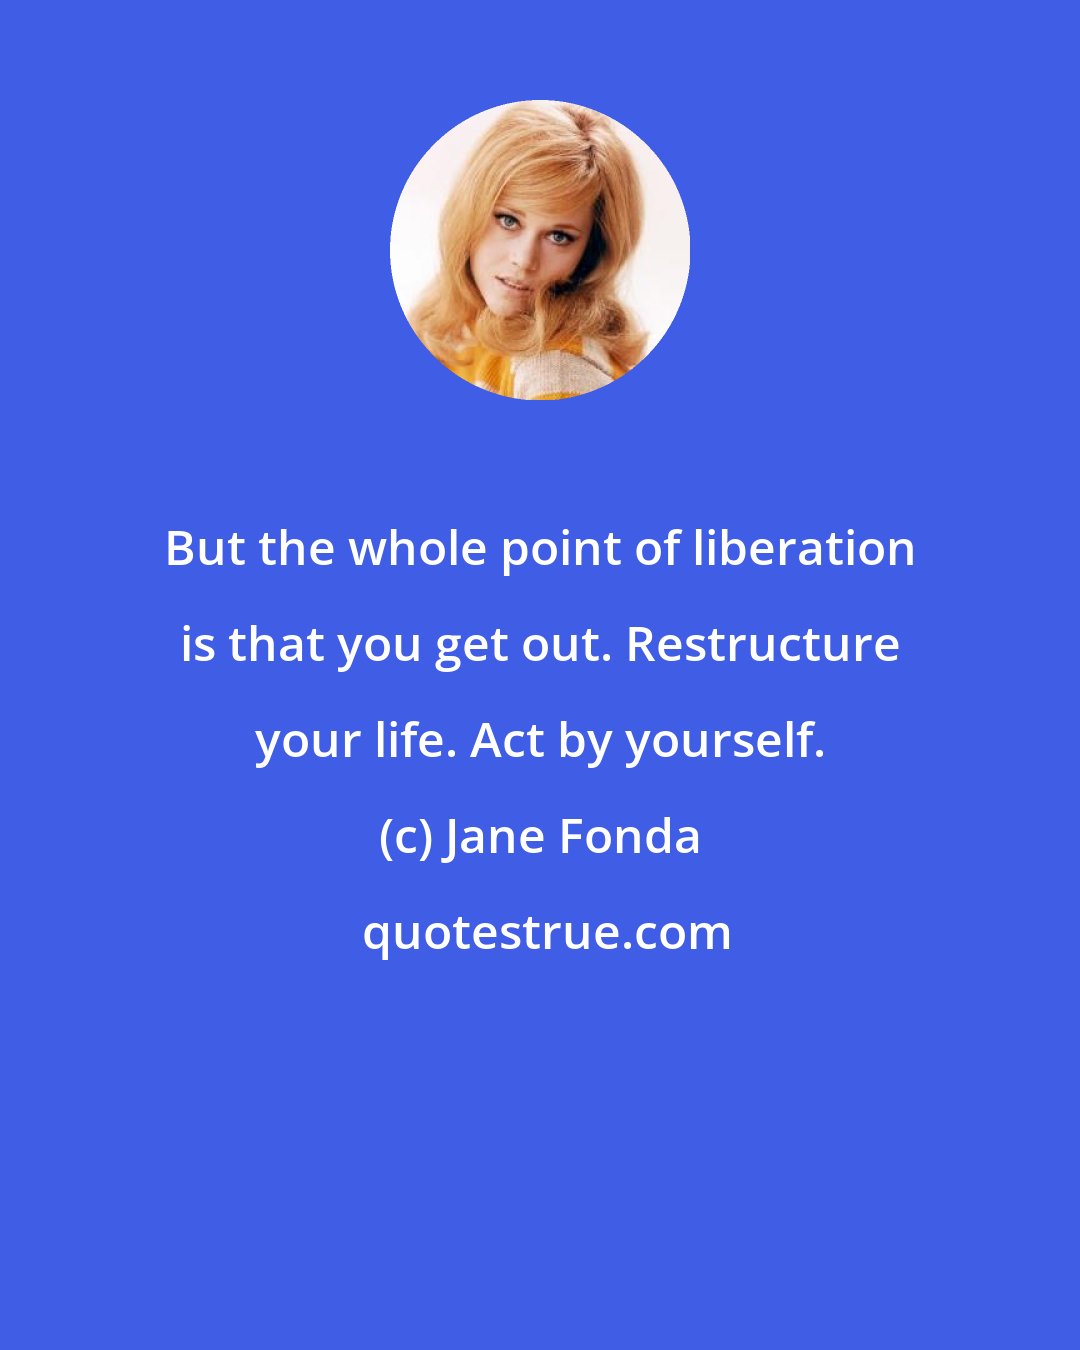 Jane Fonda: But the whole point of liberation is that you get out. Restructure your life. Act by yourself.